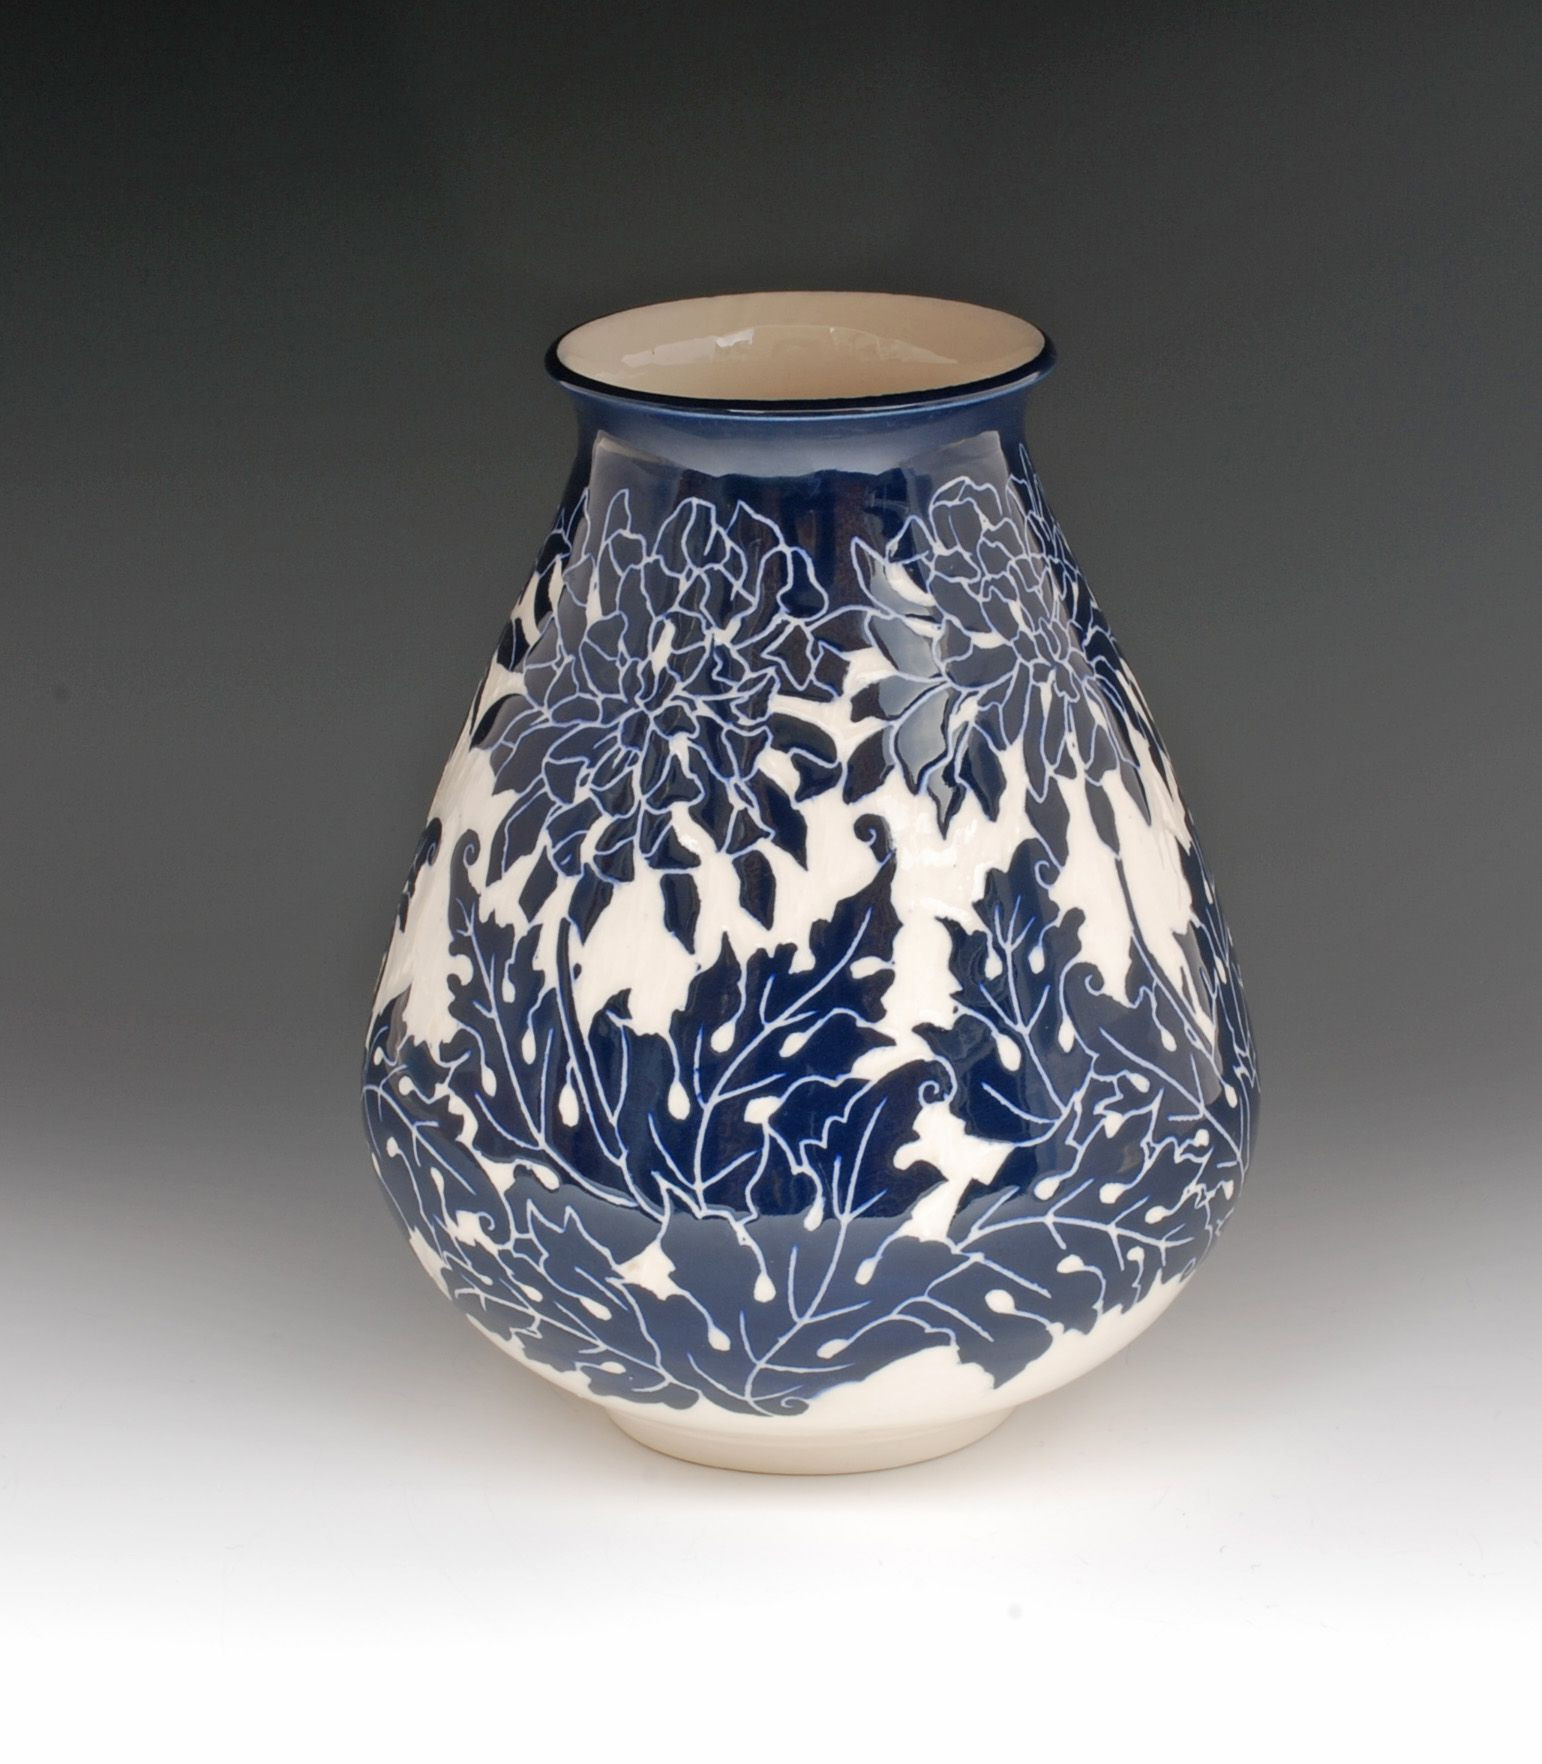 29 Recommended Pottery Vases Handmade 2024 free download pottery vases handmade of beautiful handmade and carved blue and white pottery vase by for beautiful handmade and carved blue and white pottery vase by pineville louisiana potter ken